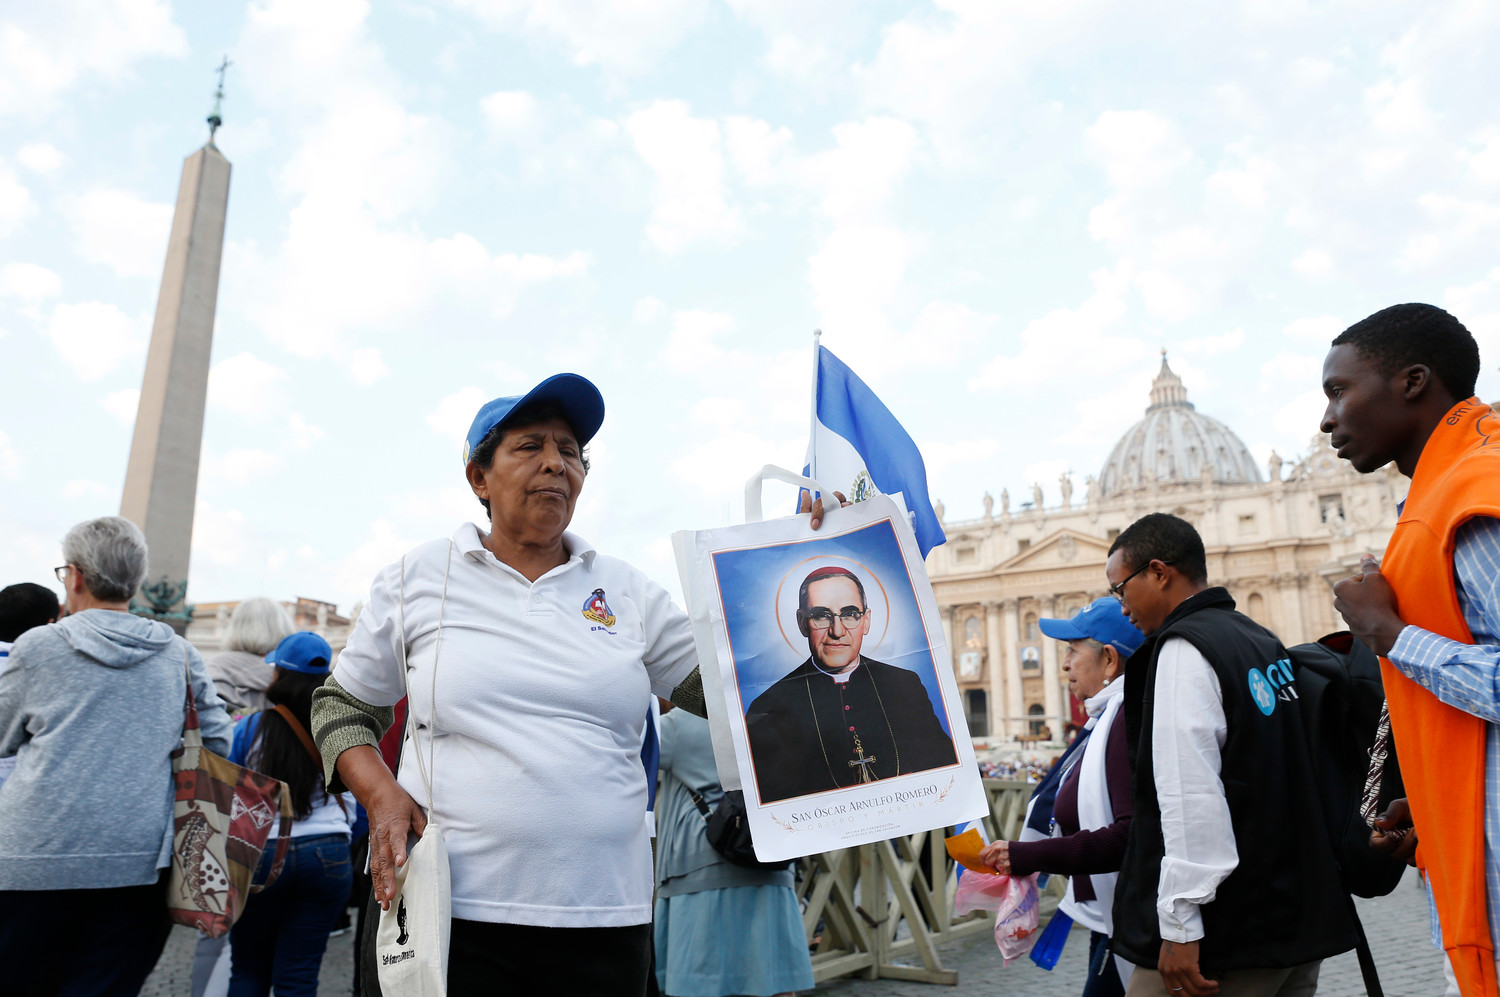 Milandro DeJesus holds a picture of St. Oscar Romero before Pope Francis’ celebration of the canonization Mass for seven new saints in St. Peter’s Square at the Vatican Oct. 14. Among the new saints are St. Paul VI and St. Oscar Romero.